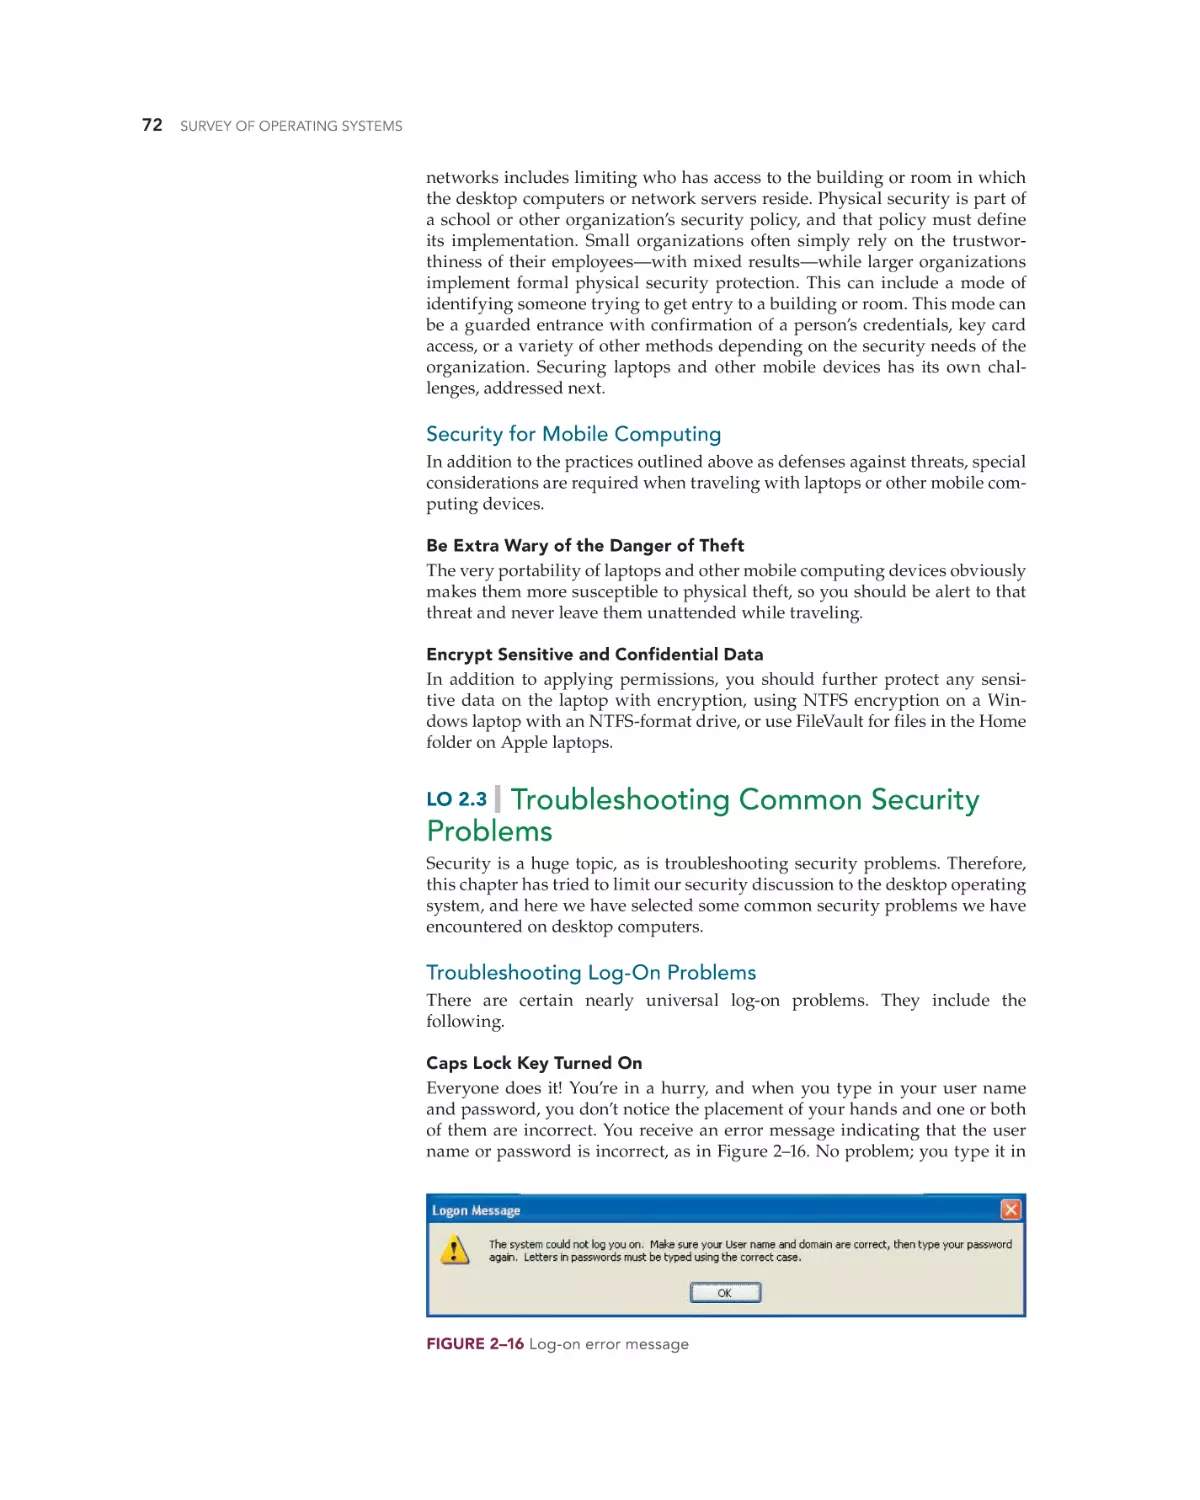 Security for Mobile Computing
Troubleshooting Common Security Problems
Troubleshooting Log-On Problems